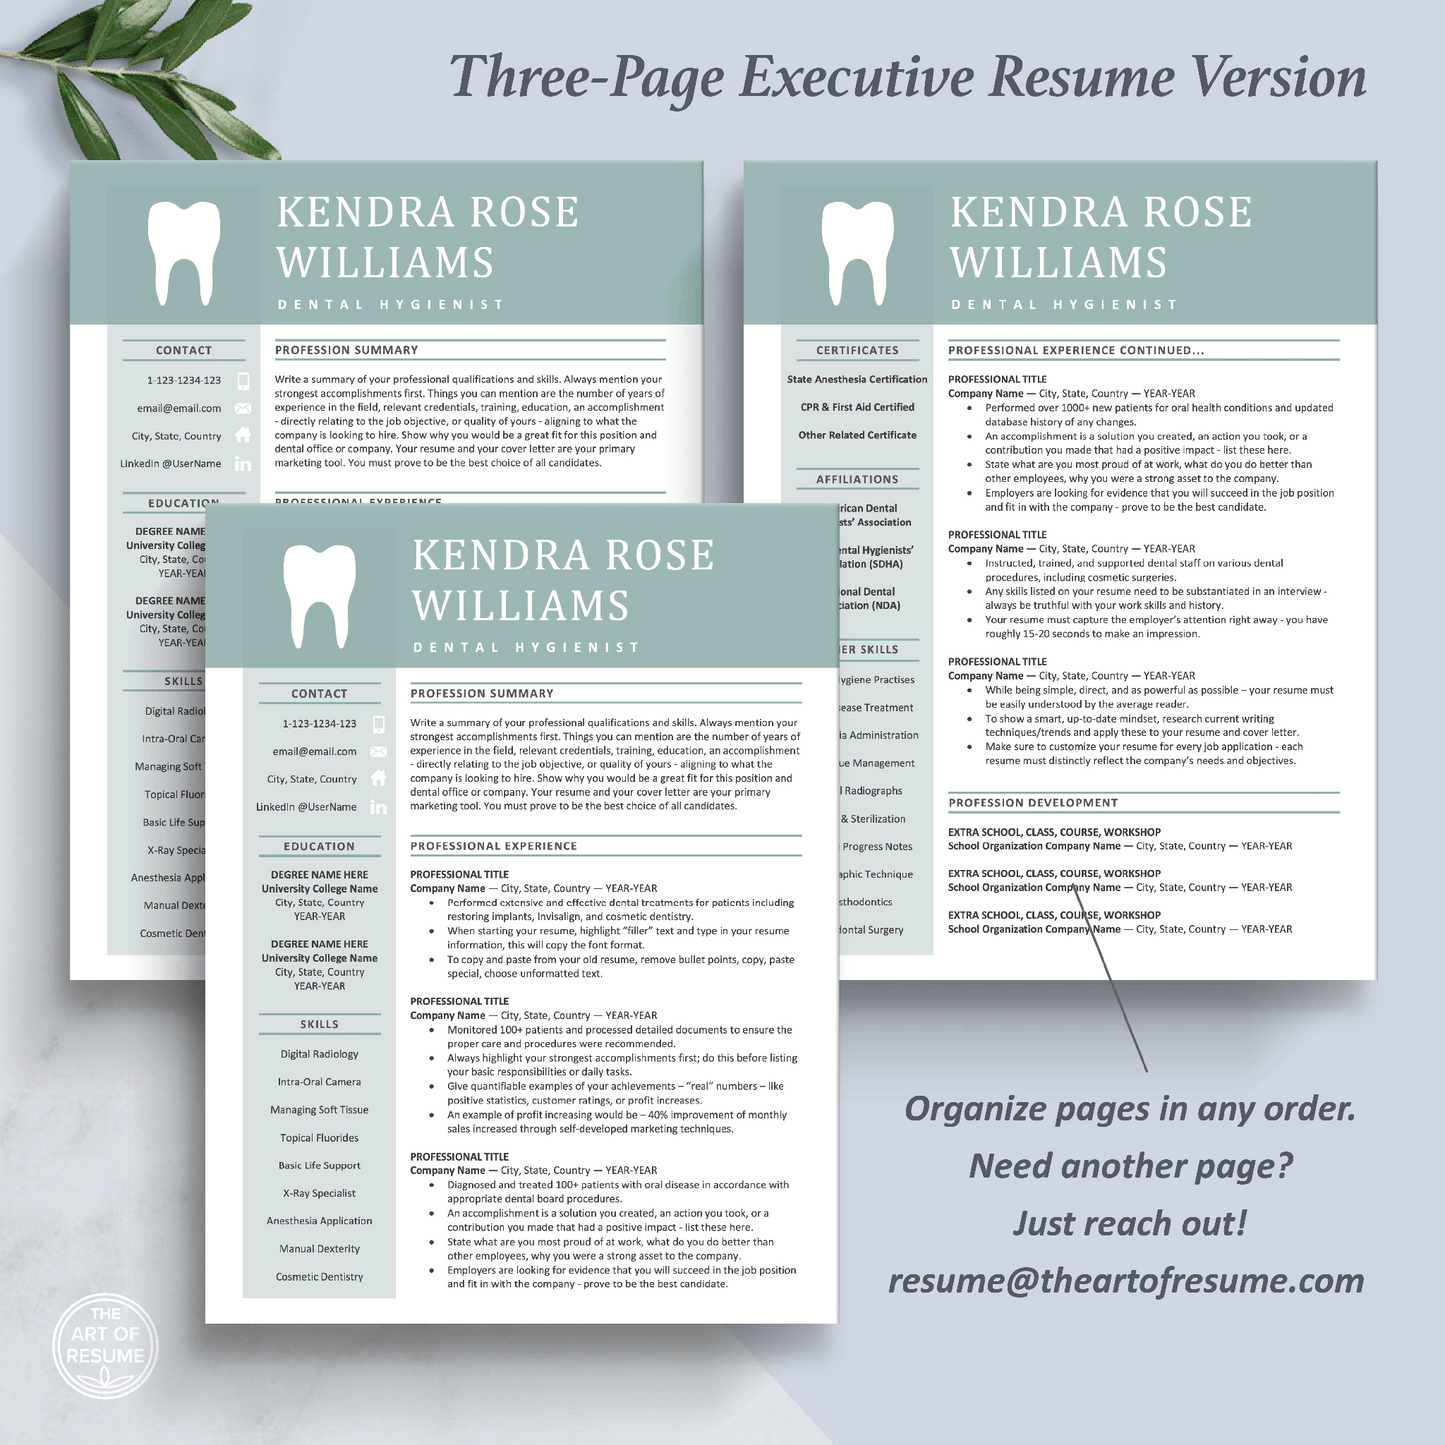 The Art of Resume Templates | Three-Page Dentist, Hygienist, Dental Student, Assistant Executive CEO C-Suite Level  Resume CV Template Format | Curriculum Vitae